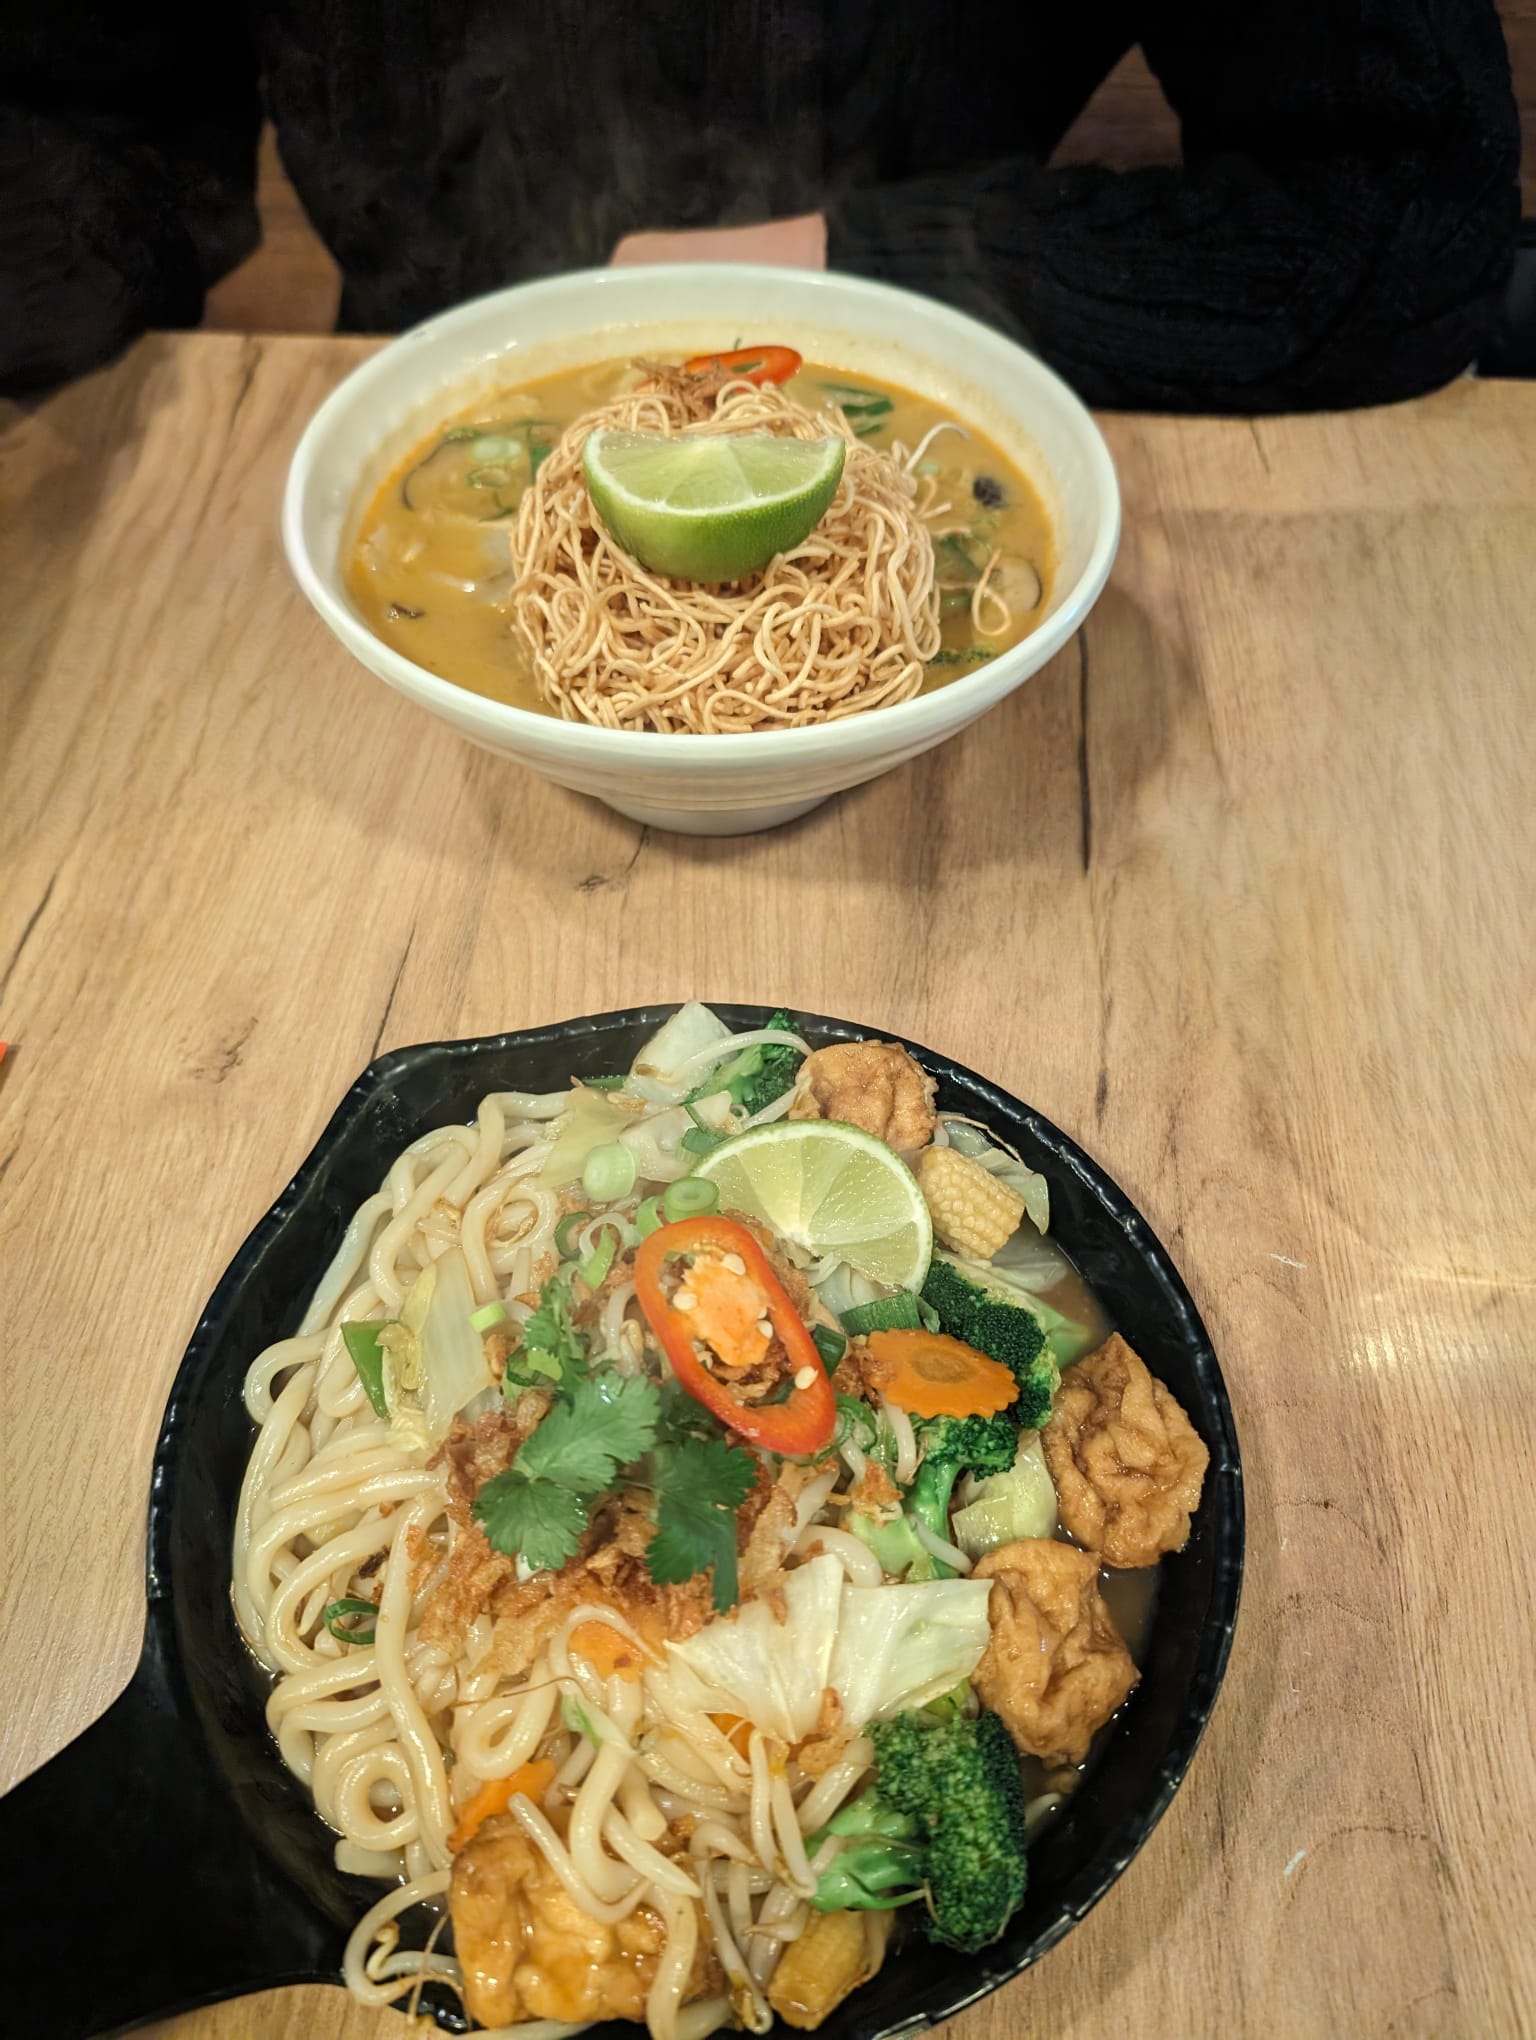 Delicious Thai ramen and noodles in Brussels.